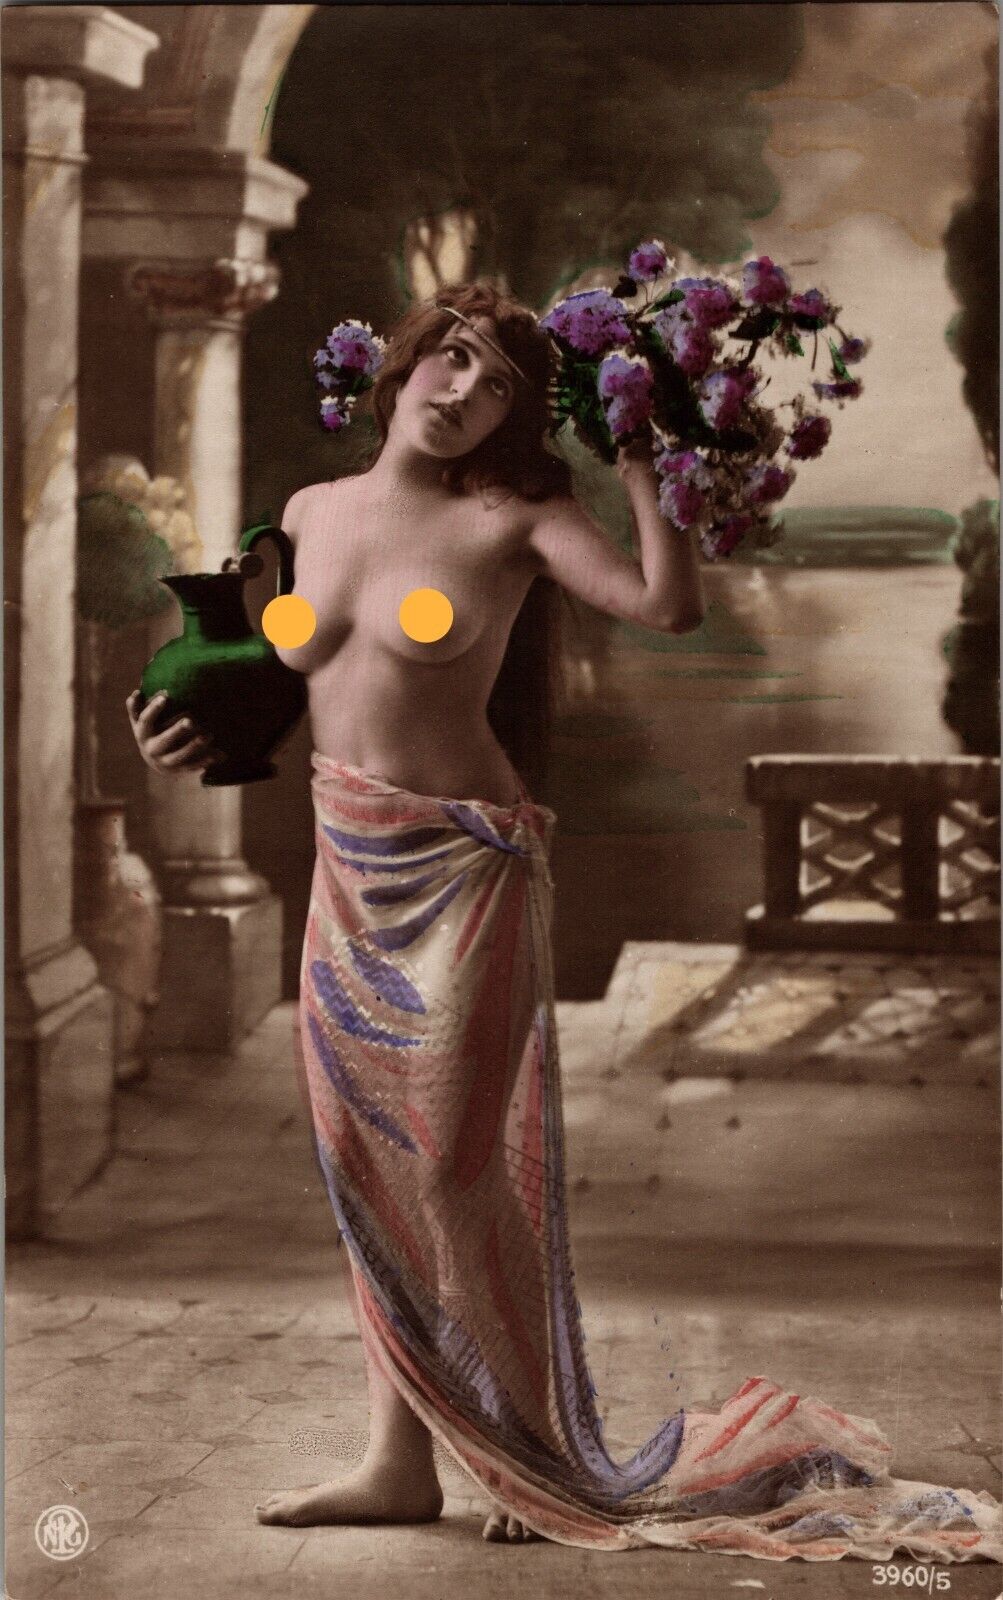 Risque Woman Exotic 1910s Colorized Real Photo Postcard RPPC Germany, Scarce